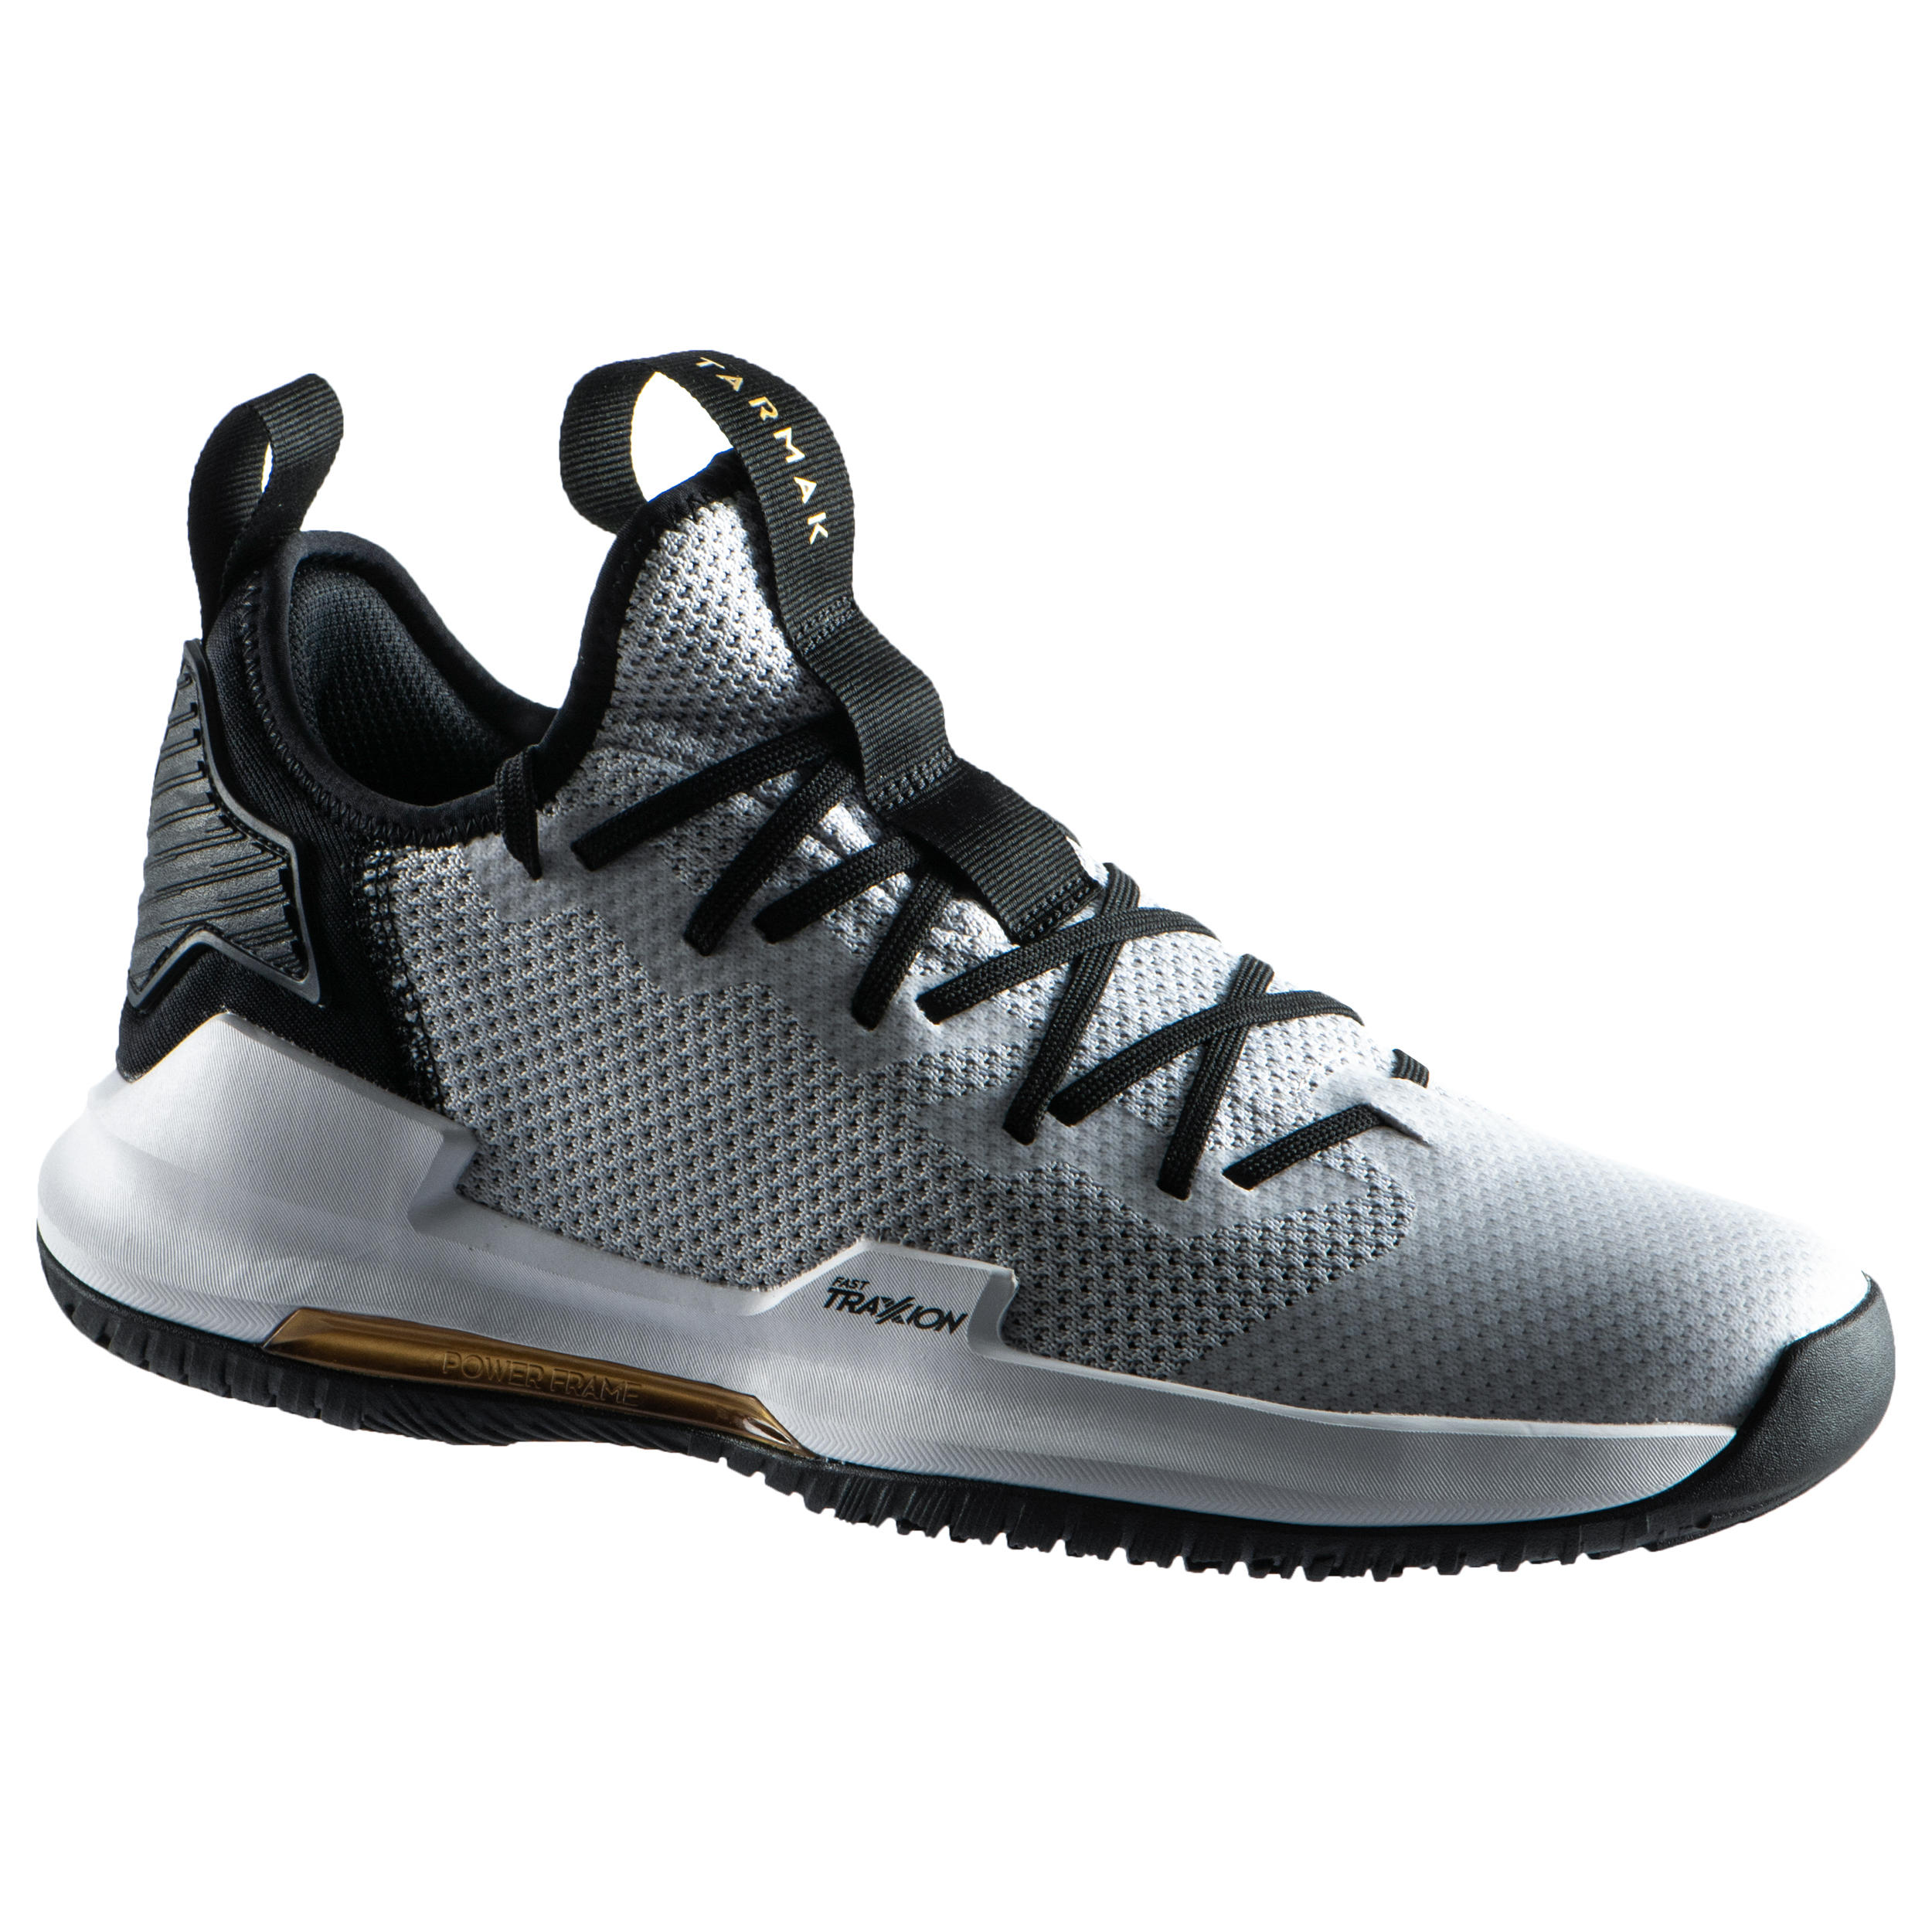 Low-Rise Basketball Shoes Fast 500 - Grey